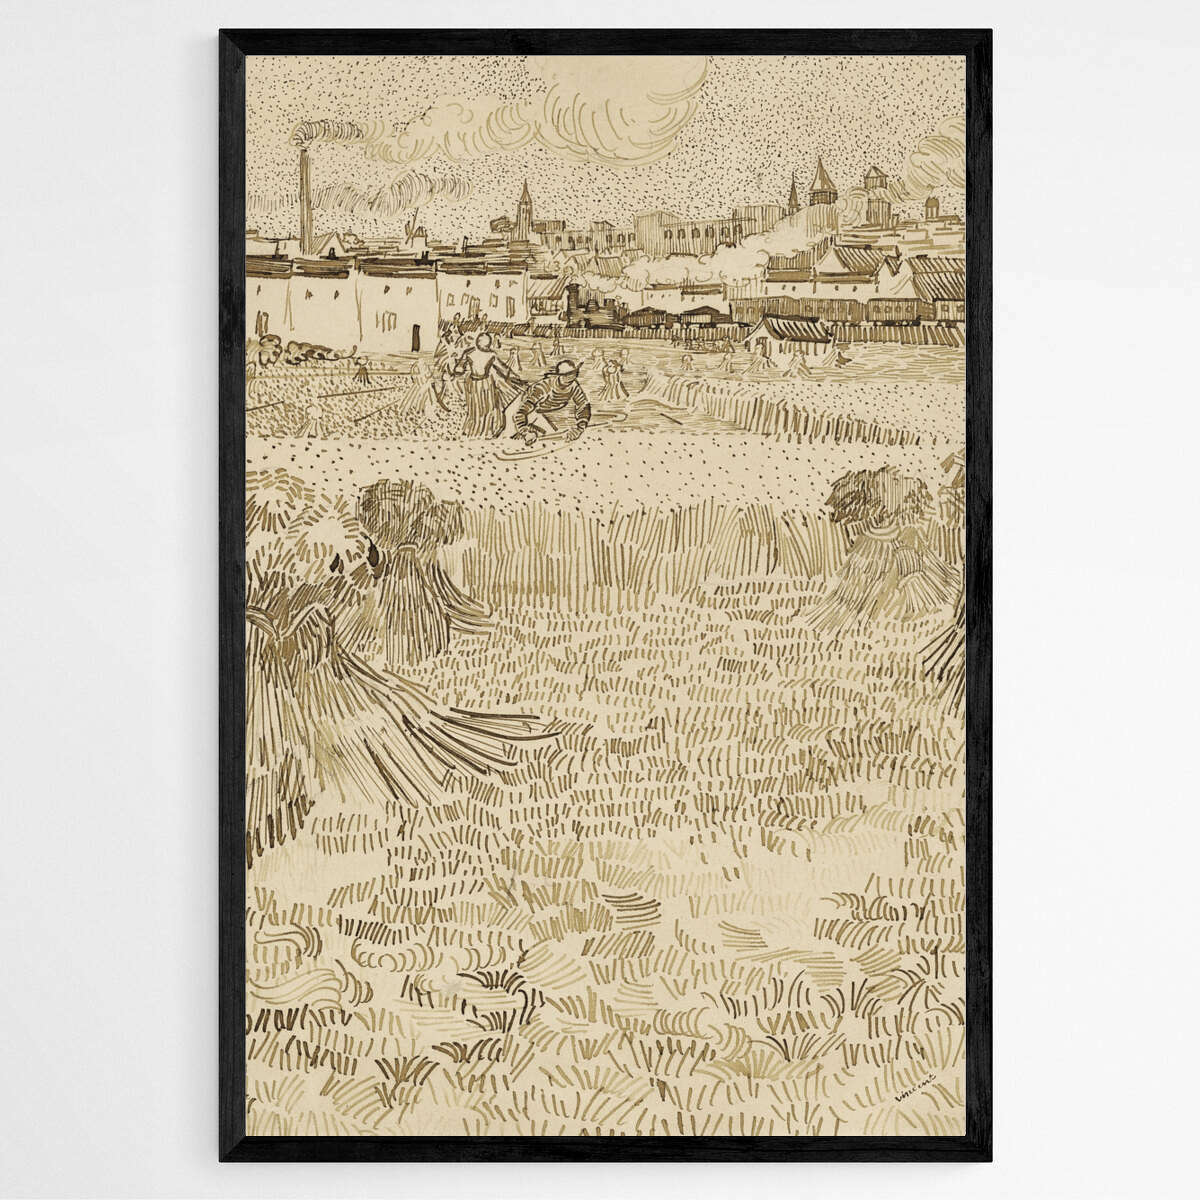 Arles View from the Wheatfields by Vincent Van Gogh | Vincent Van Gogh Wall Art Prints - The Canvas Hive